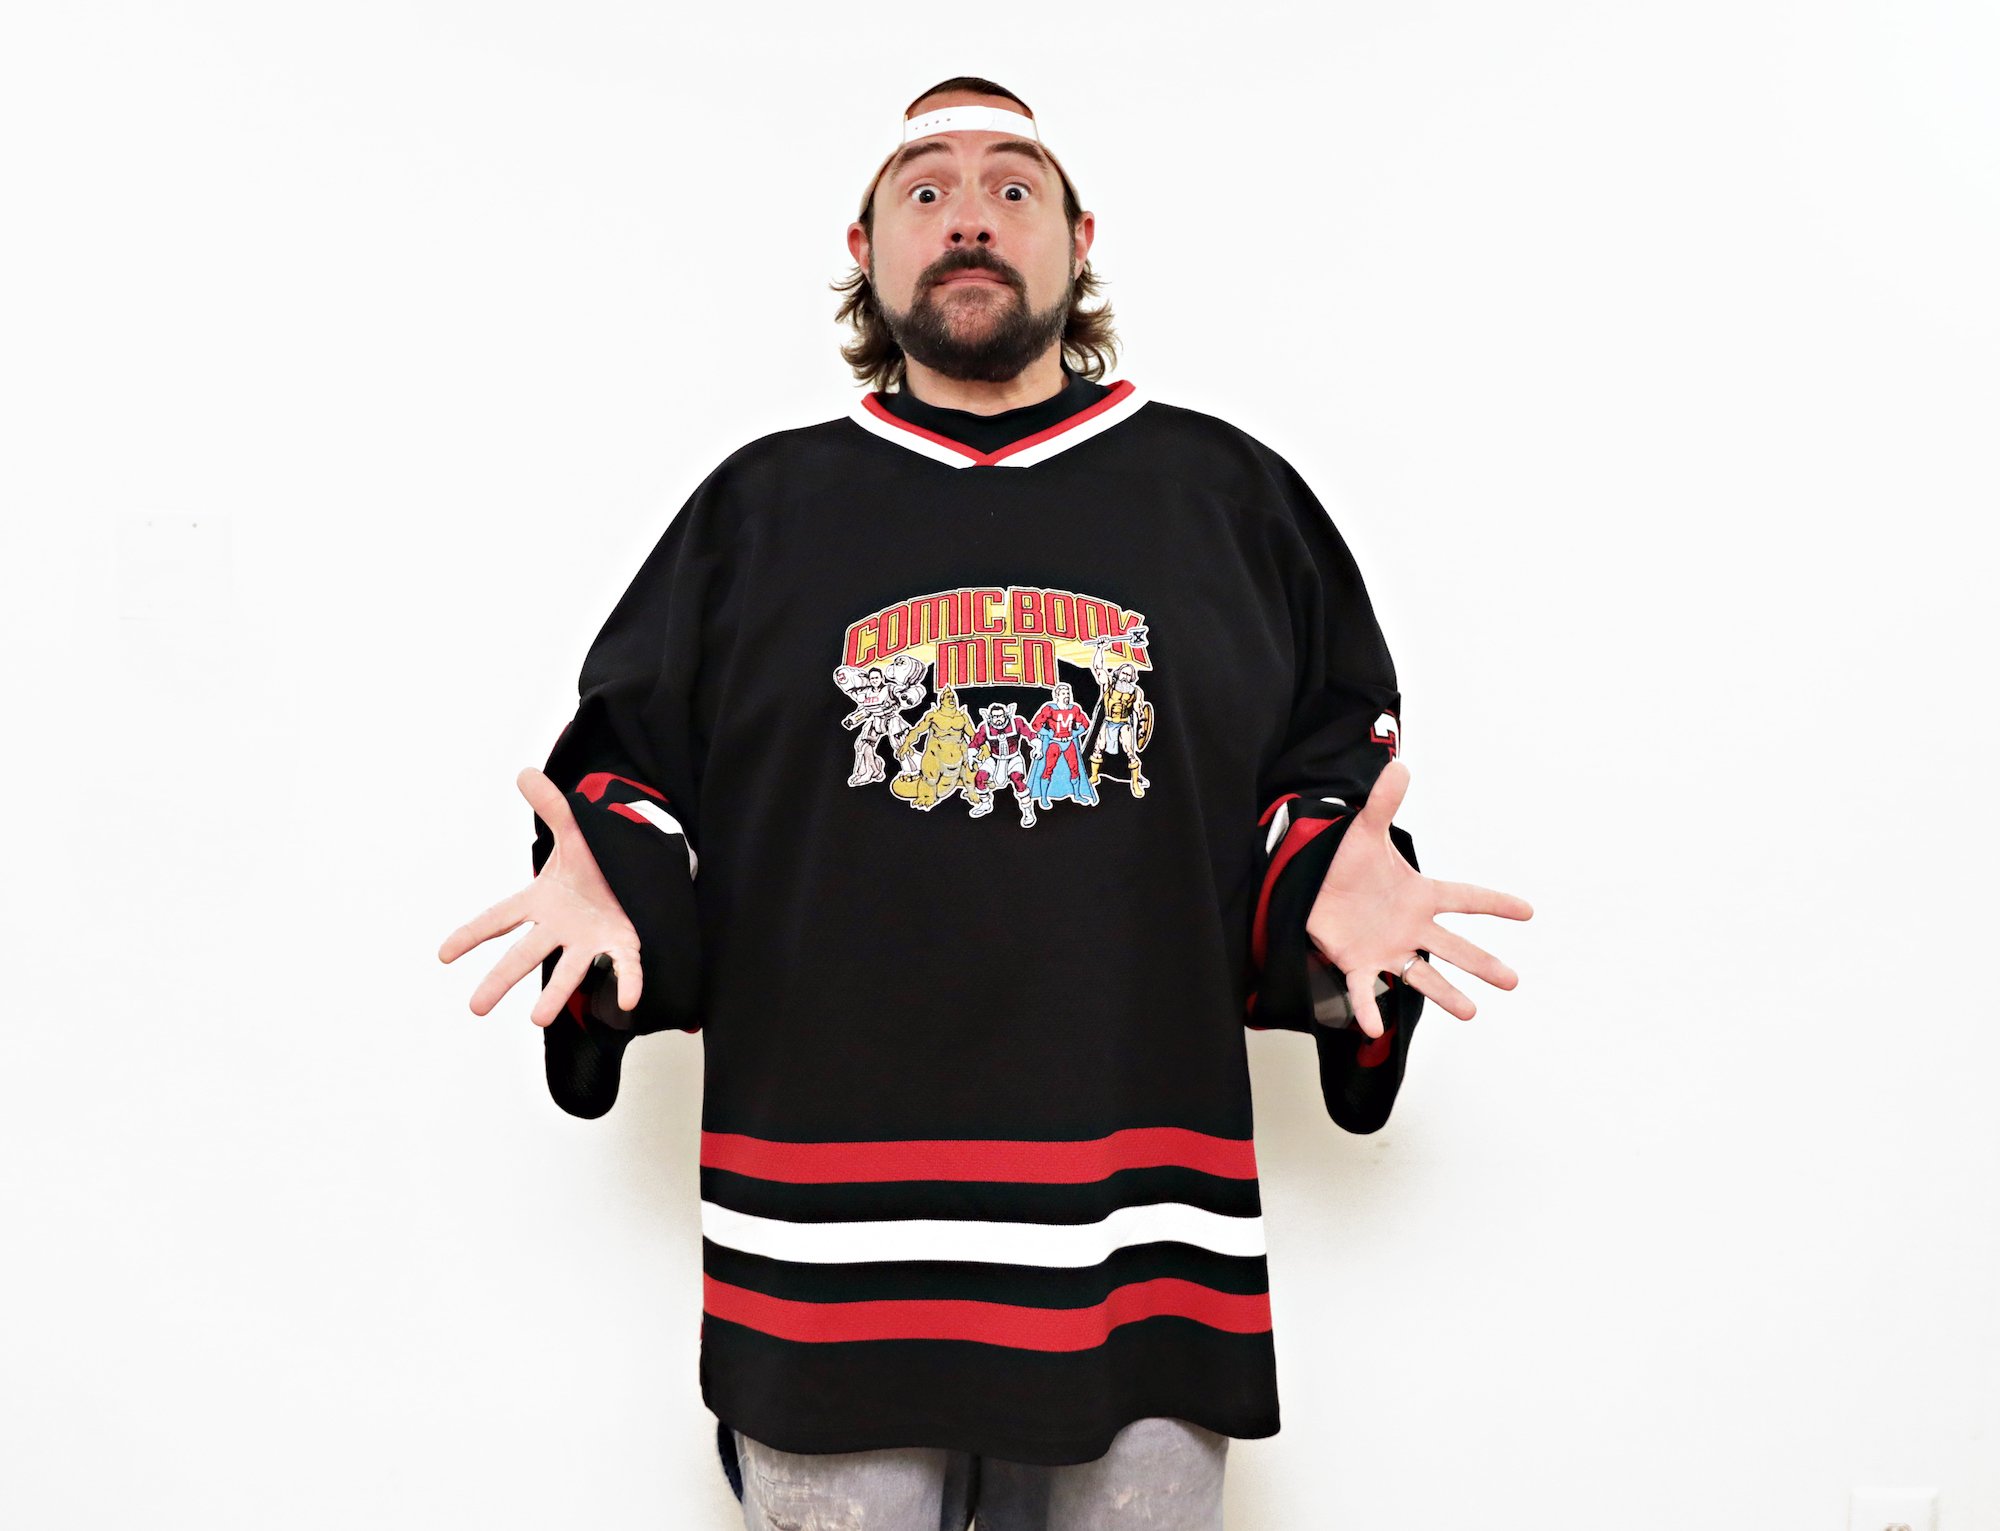 Kevin Smith shrugging, wide eyed and looking surprised, in front of a white background